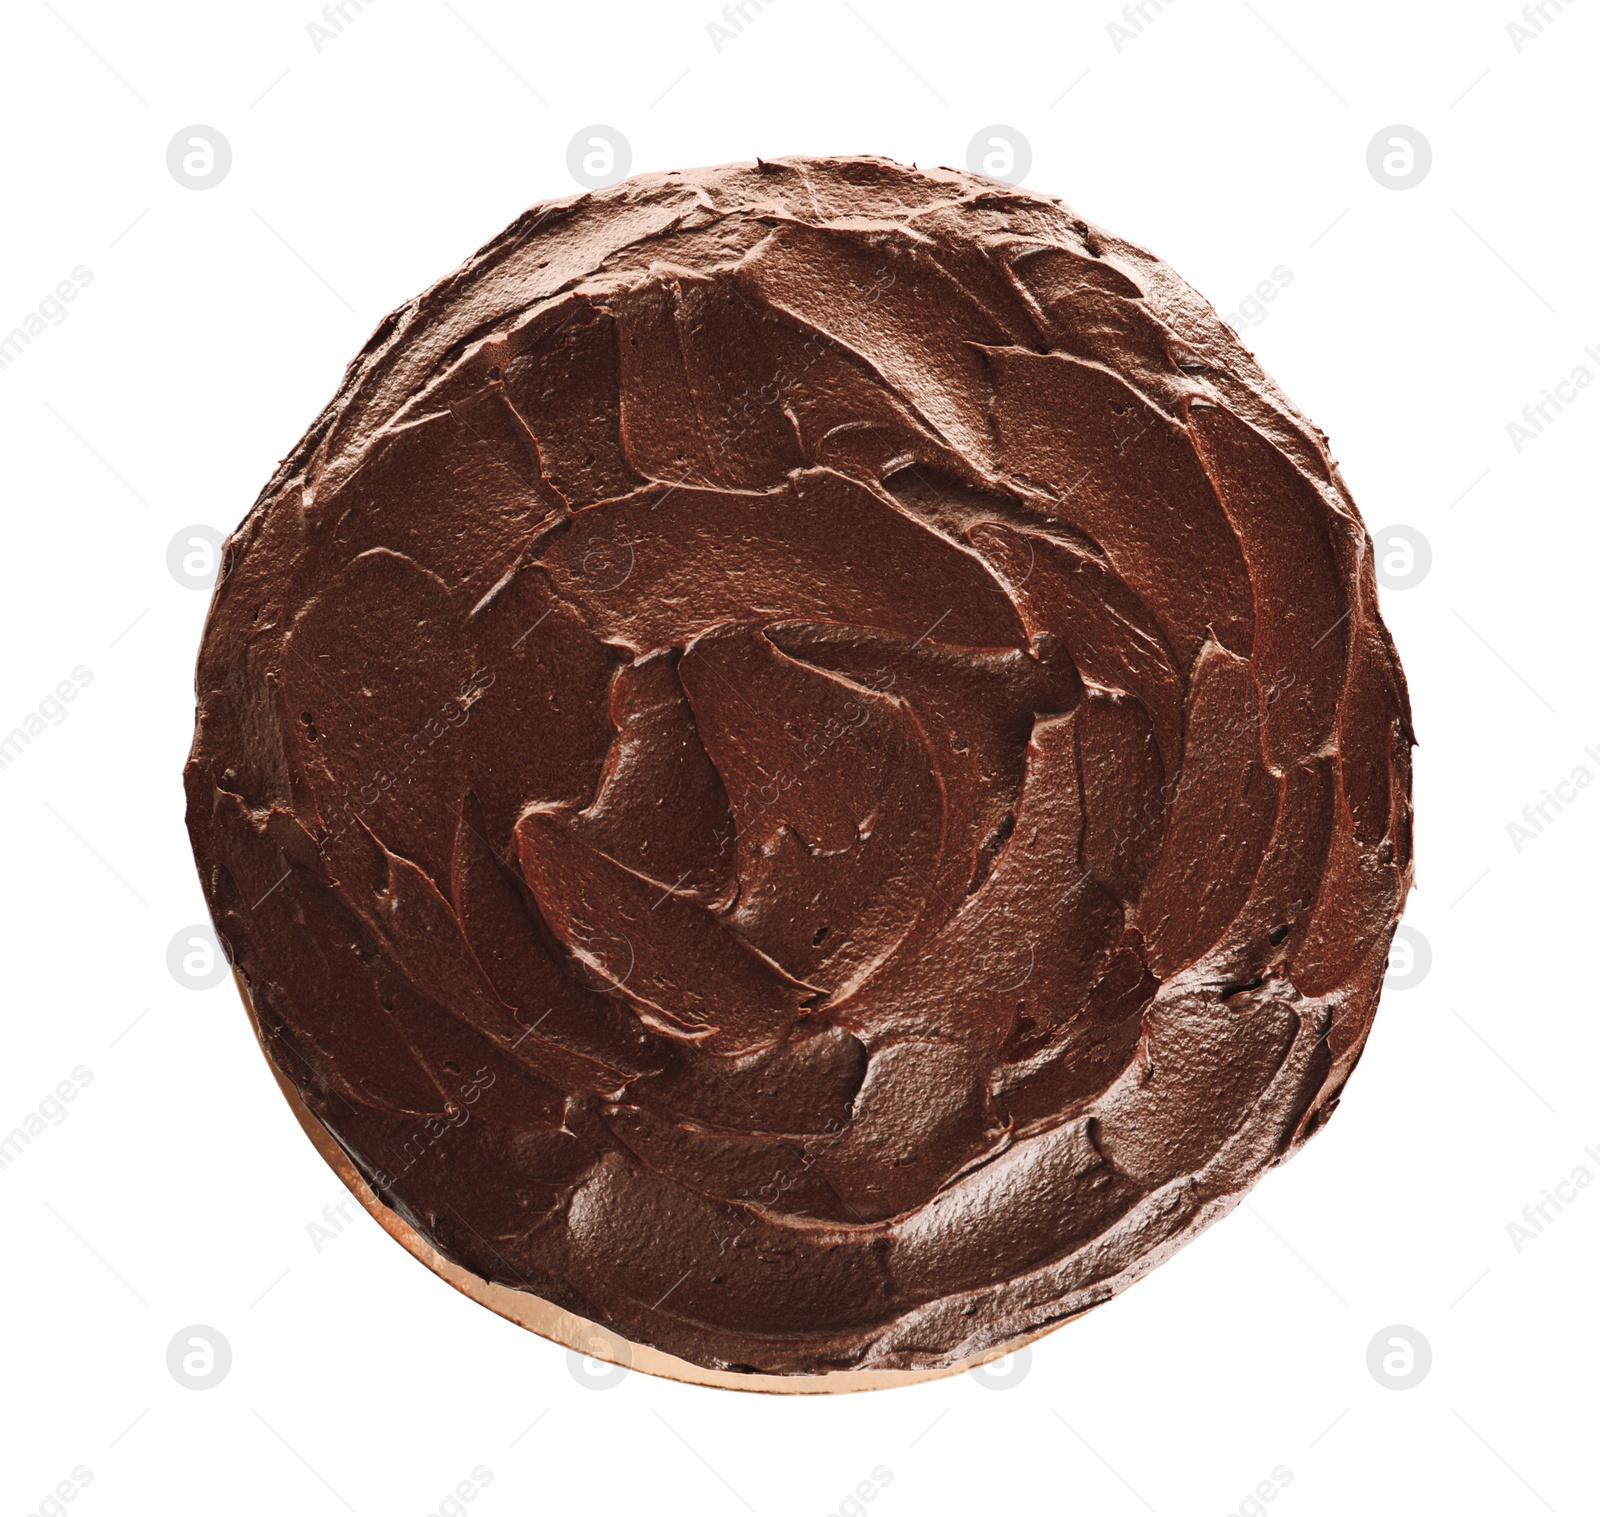 Photo of Tasty homemade chocolate cake on white background, top view